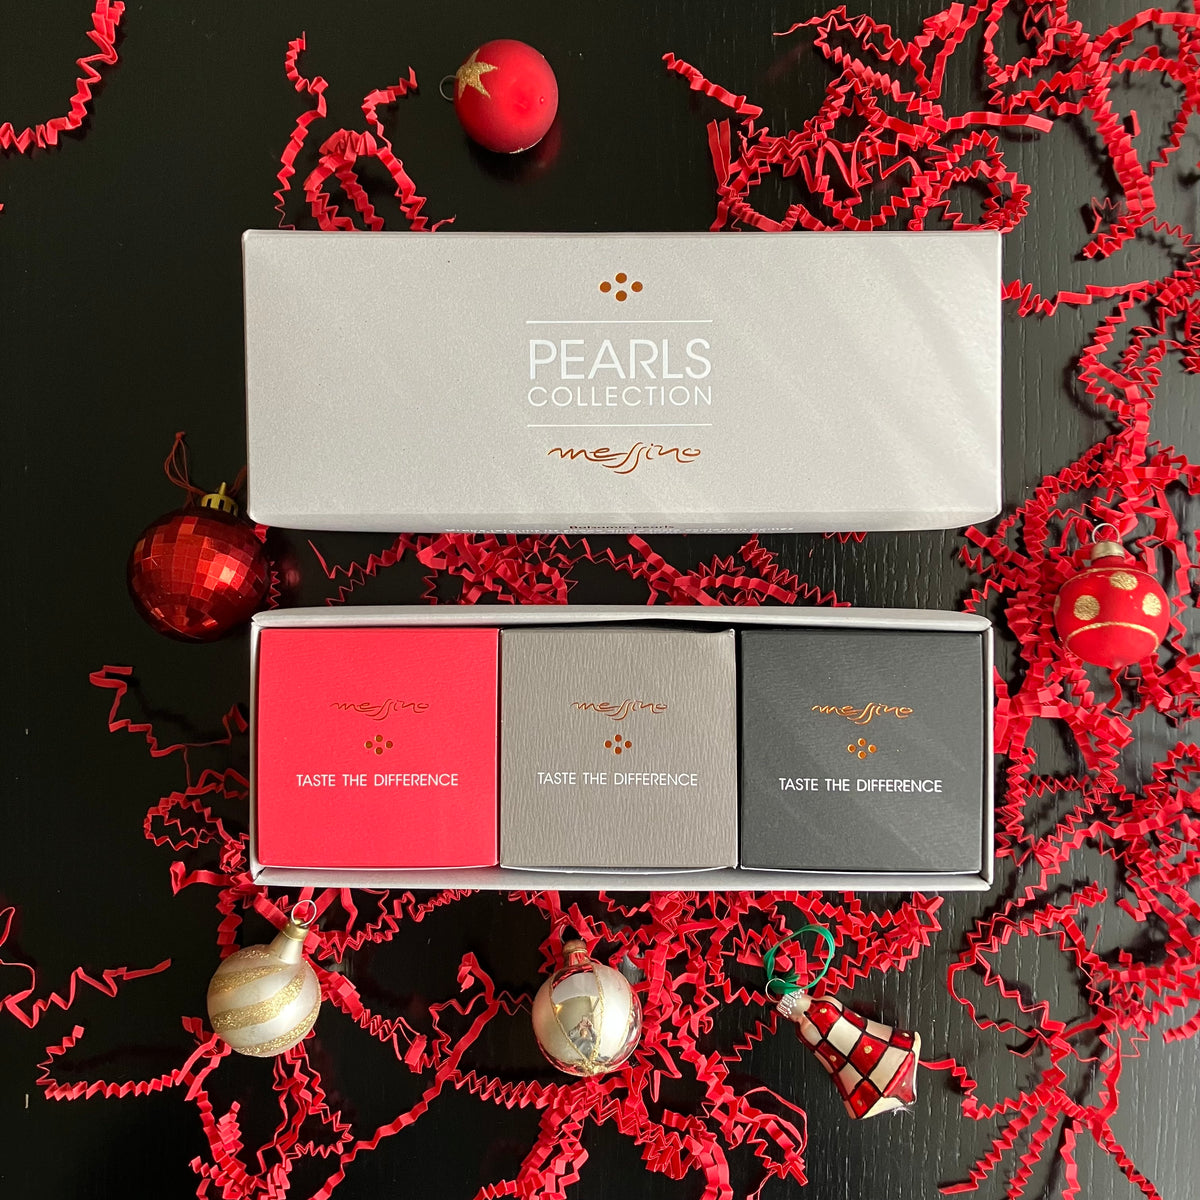 Messino Pearls Collection - Classic Balsamic, Truffle Balsamic and Pomegranate Flavors <br> Price includes shipping